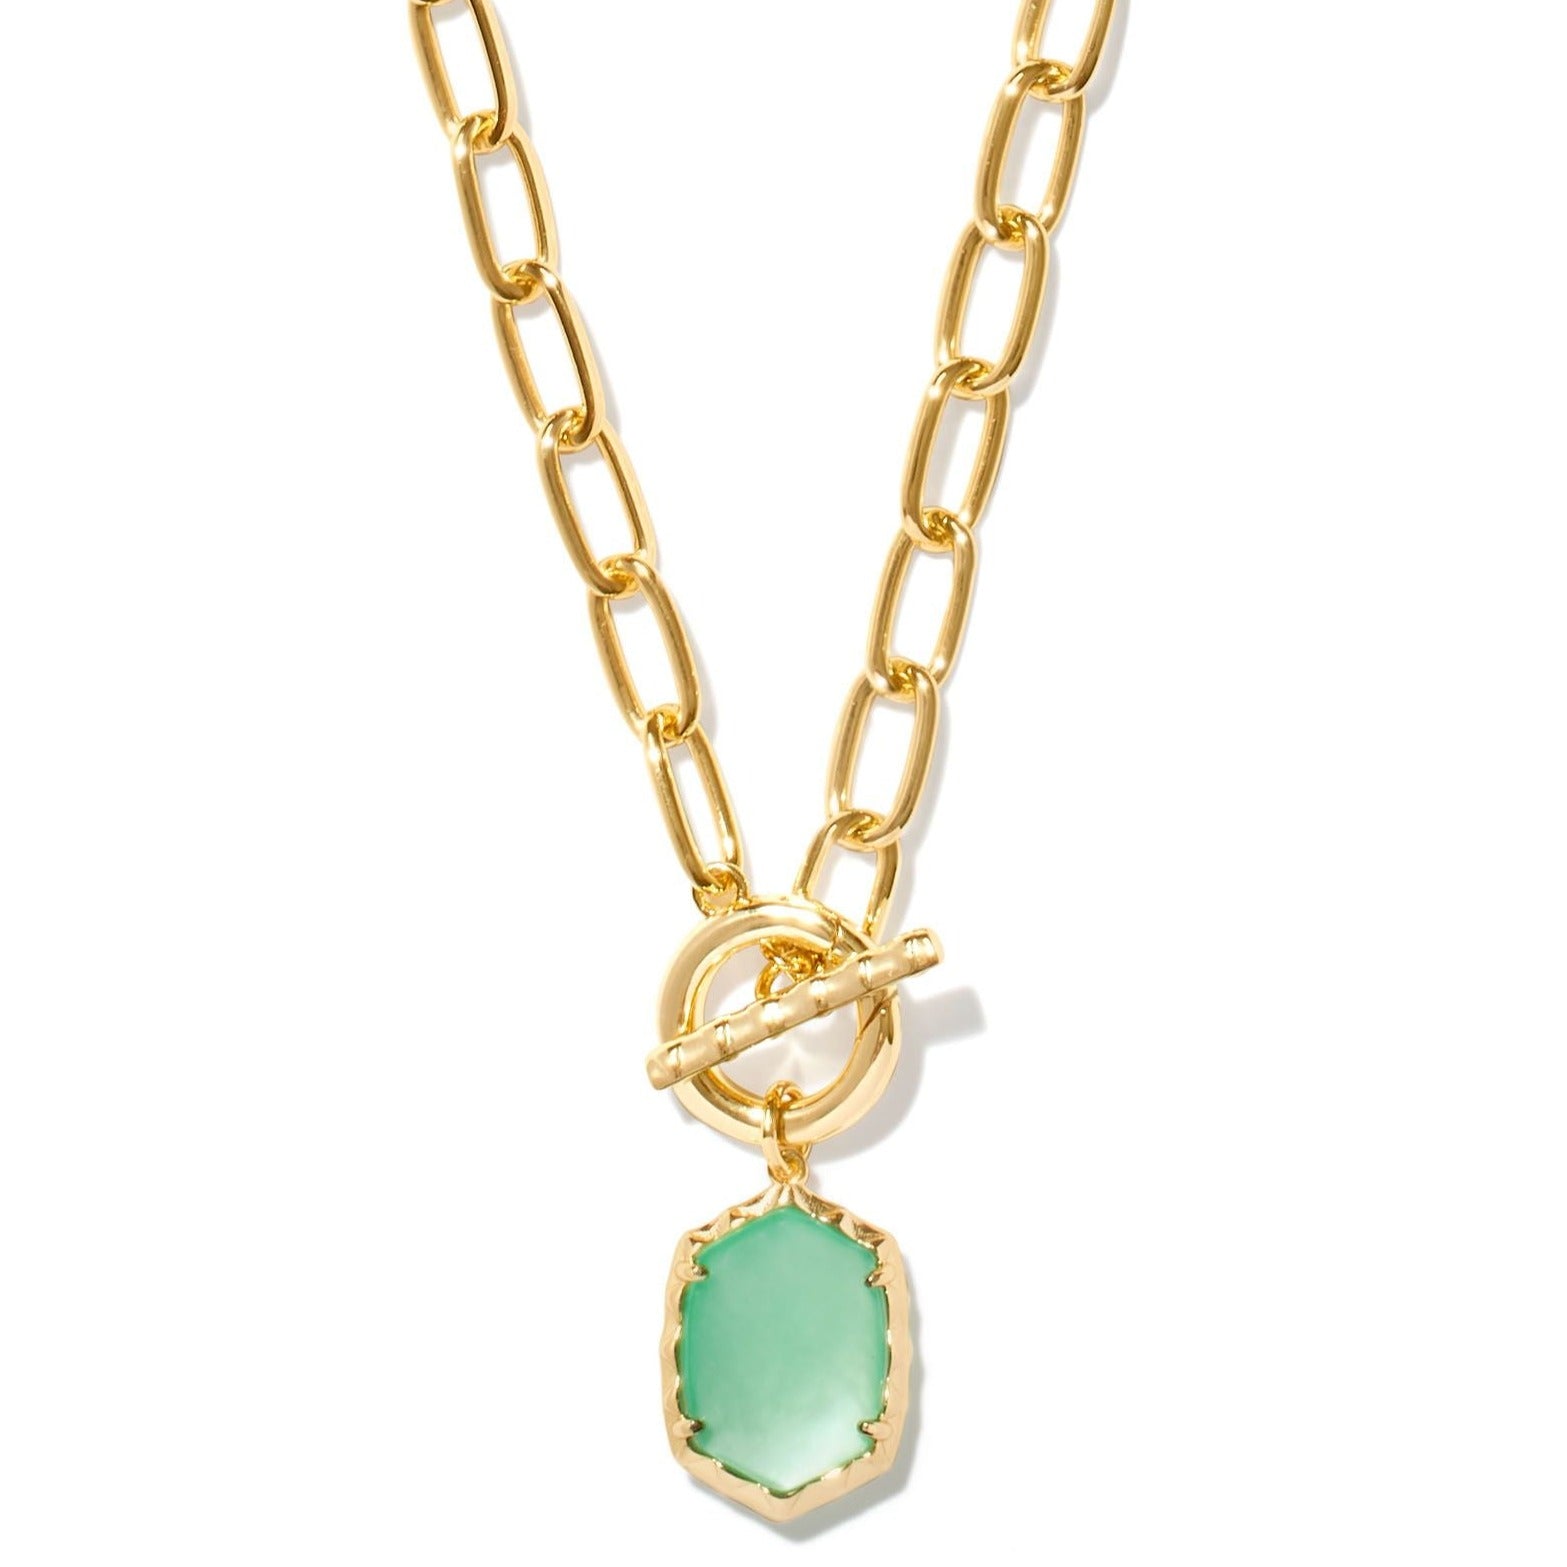 Kendra Scott | Daphne Gold Link and Chain Necklace in Light Green Mother of Pearl - Giddy Up Glamour Boutique